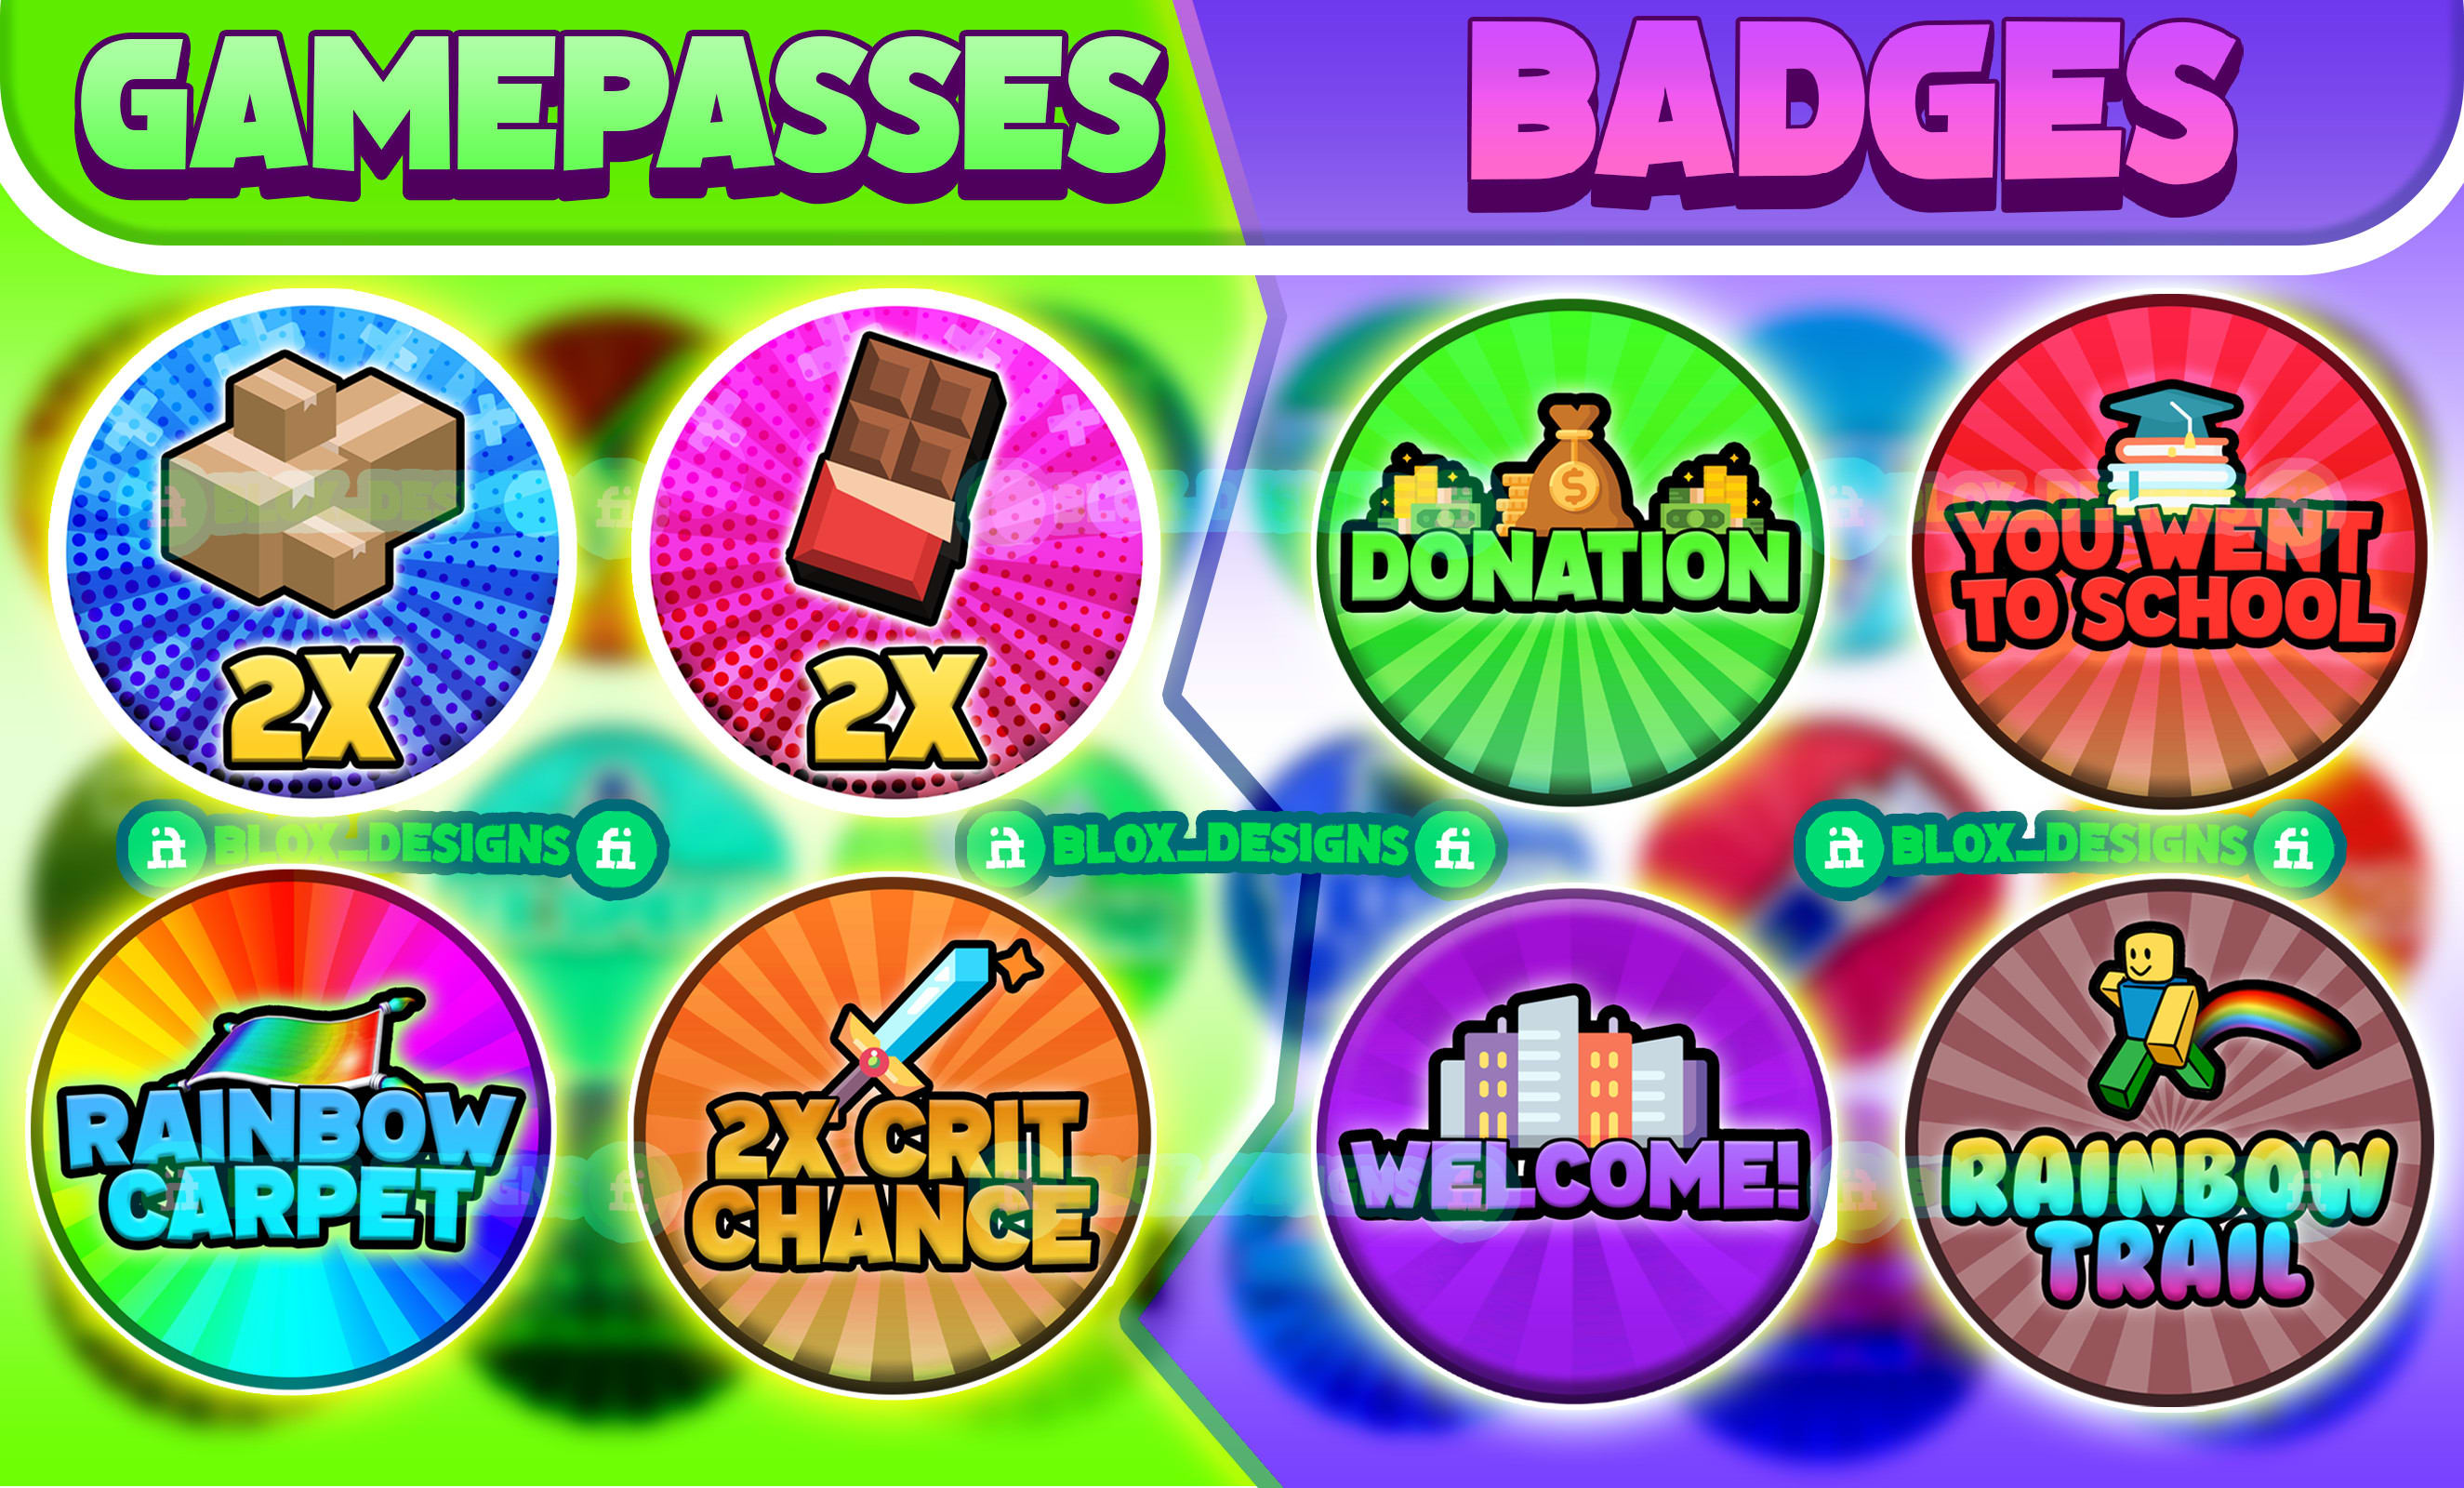 Create roblox gamepass and badge icons for your roblox game by